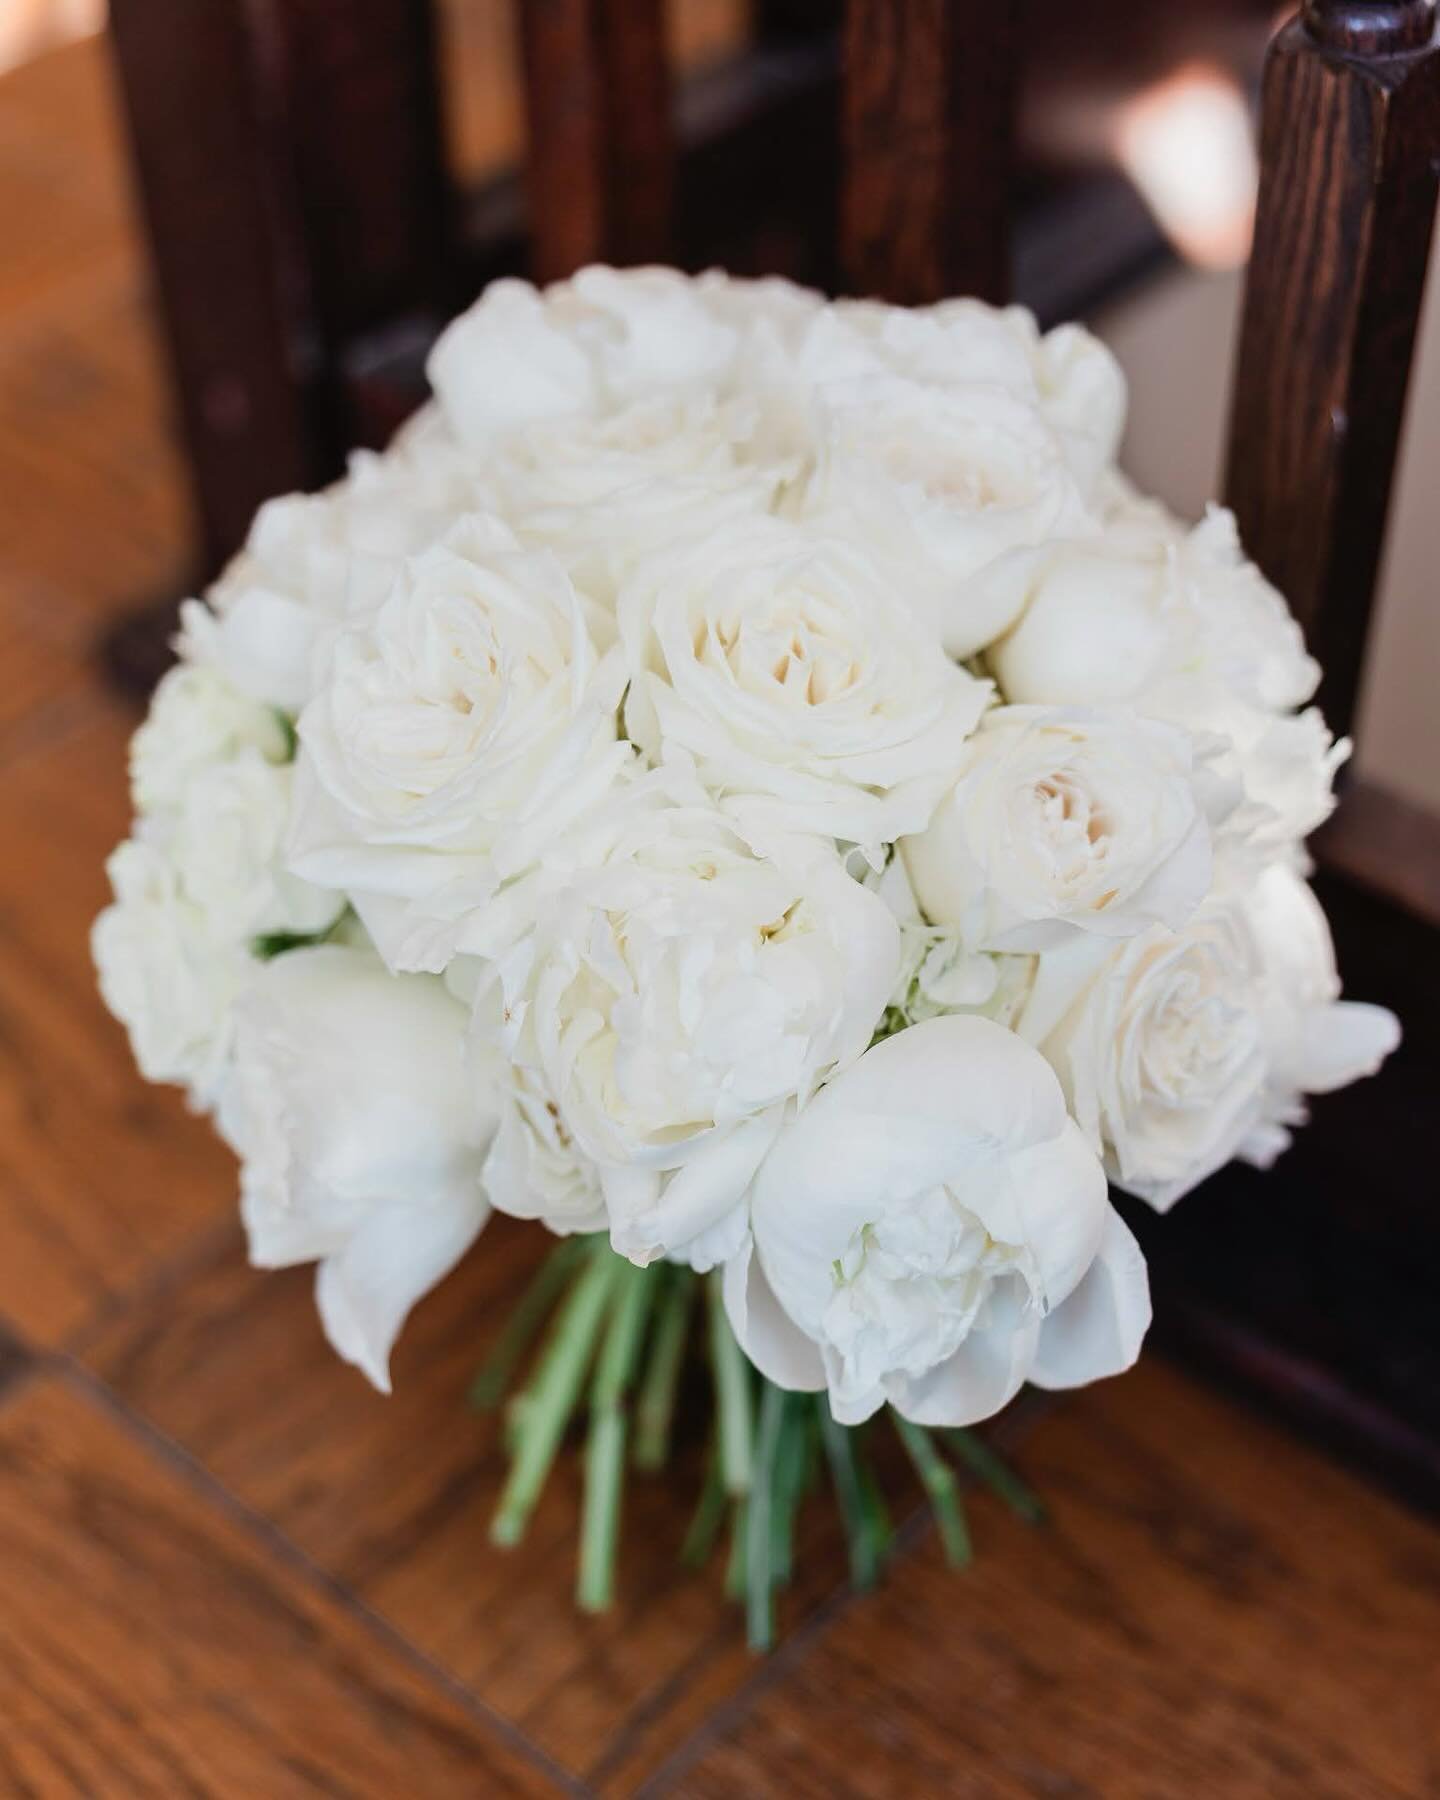 If serenity was a bouquet, this would be it. 
&bull;
#bridalbouquet 
#peonybridalbouquet 
#classicbridalbouquet